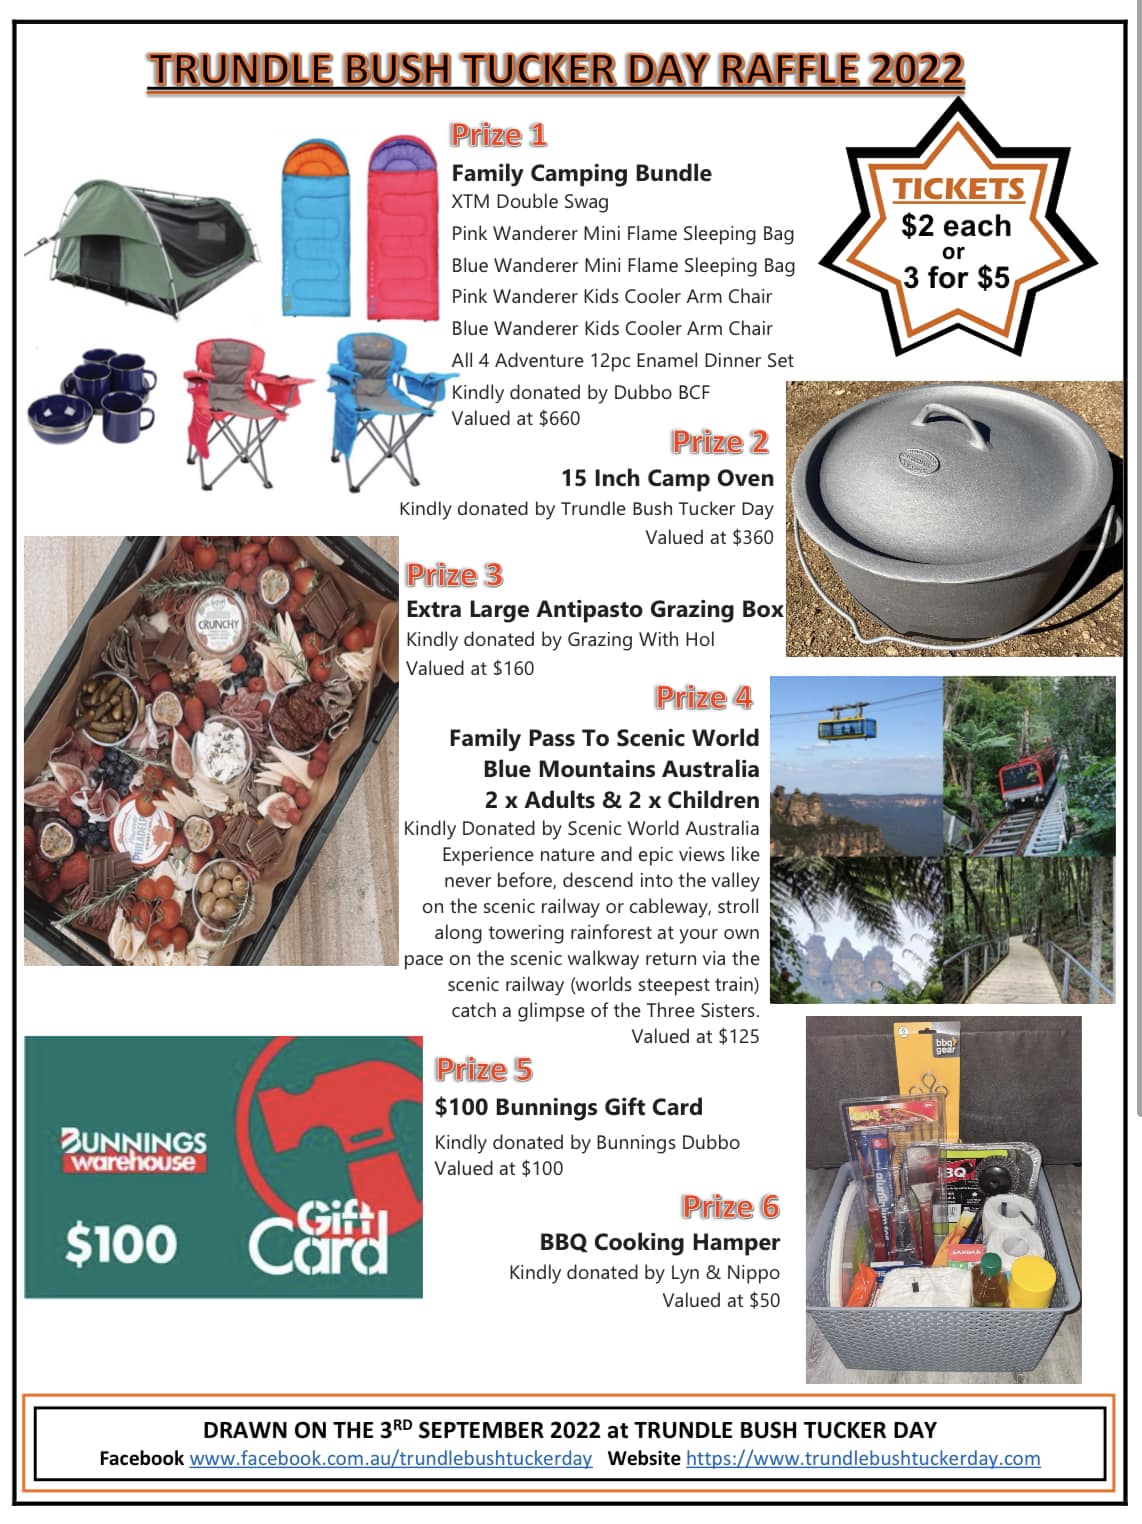 Prize 1: Sylvia Beattrie - Family Camping Bundle, donated by Dubbo BCF (Valued at $660). Prize 2: Janelle Malouf - 15 Inch Camp Oven, donated by Trundle Bush Tucker Day (Valued at $360). Prize 3: David Brennan - Extra Large Antipasto Grazing Box, donated by Grazing with Hol (Valued at $160). Prize 4: Garry Russel - Family Pass to Scenic World Blue Mountains Australia 2x Adults and 2x Children, donated by Scenic World Australia (Valued at $125). Prize 5: Kyle Payne - $100 Bunnings Gift Card, donated by Bunnings Dubbo (Valued at $100). And Prize 6: David Brennan - BBQ Cooking Hamper, donated by Lyn and Nippo (Valued at $50). Image Credit: Trundle Bush Tucker Day Facebook Page.